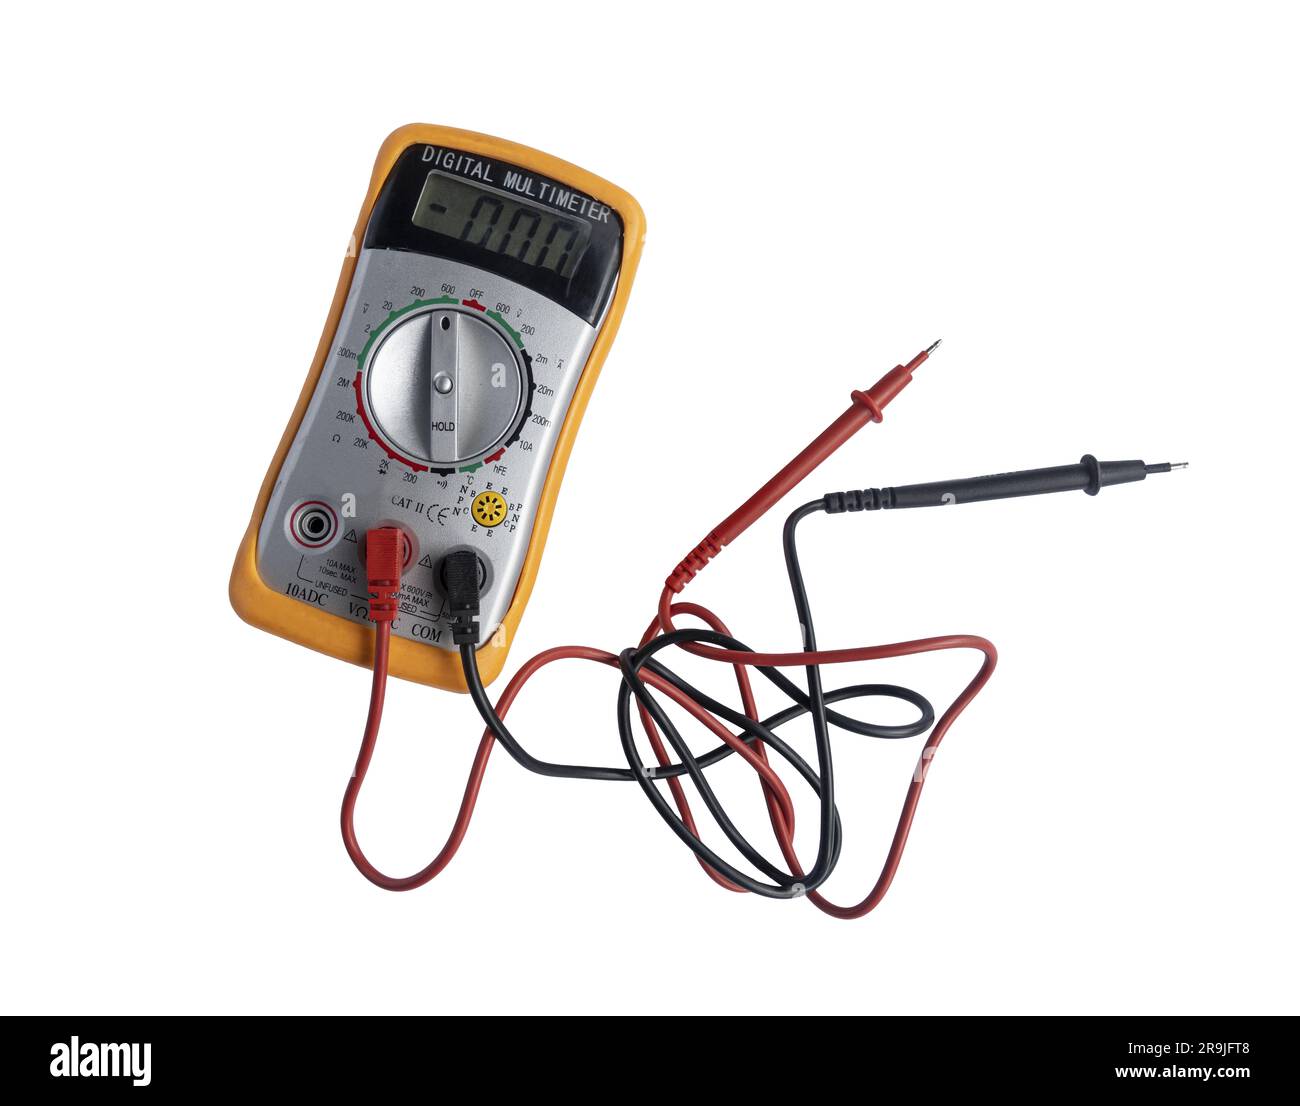 a digital multimeter on a transparent background Stock Photo